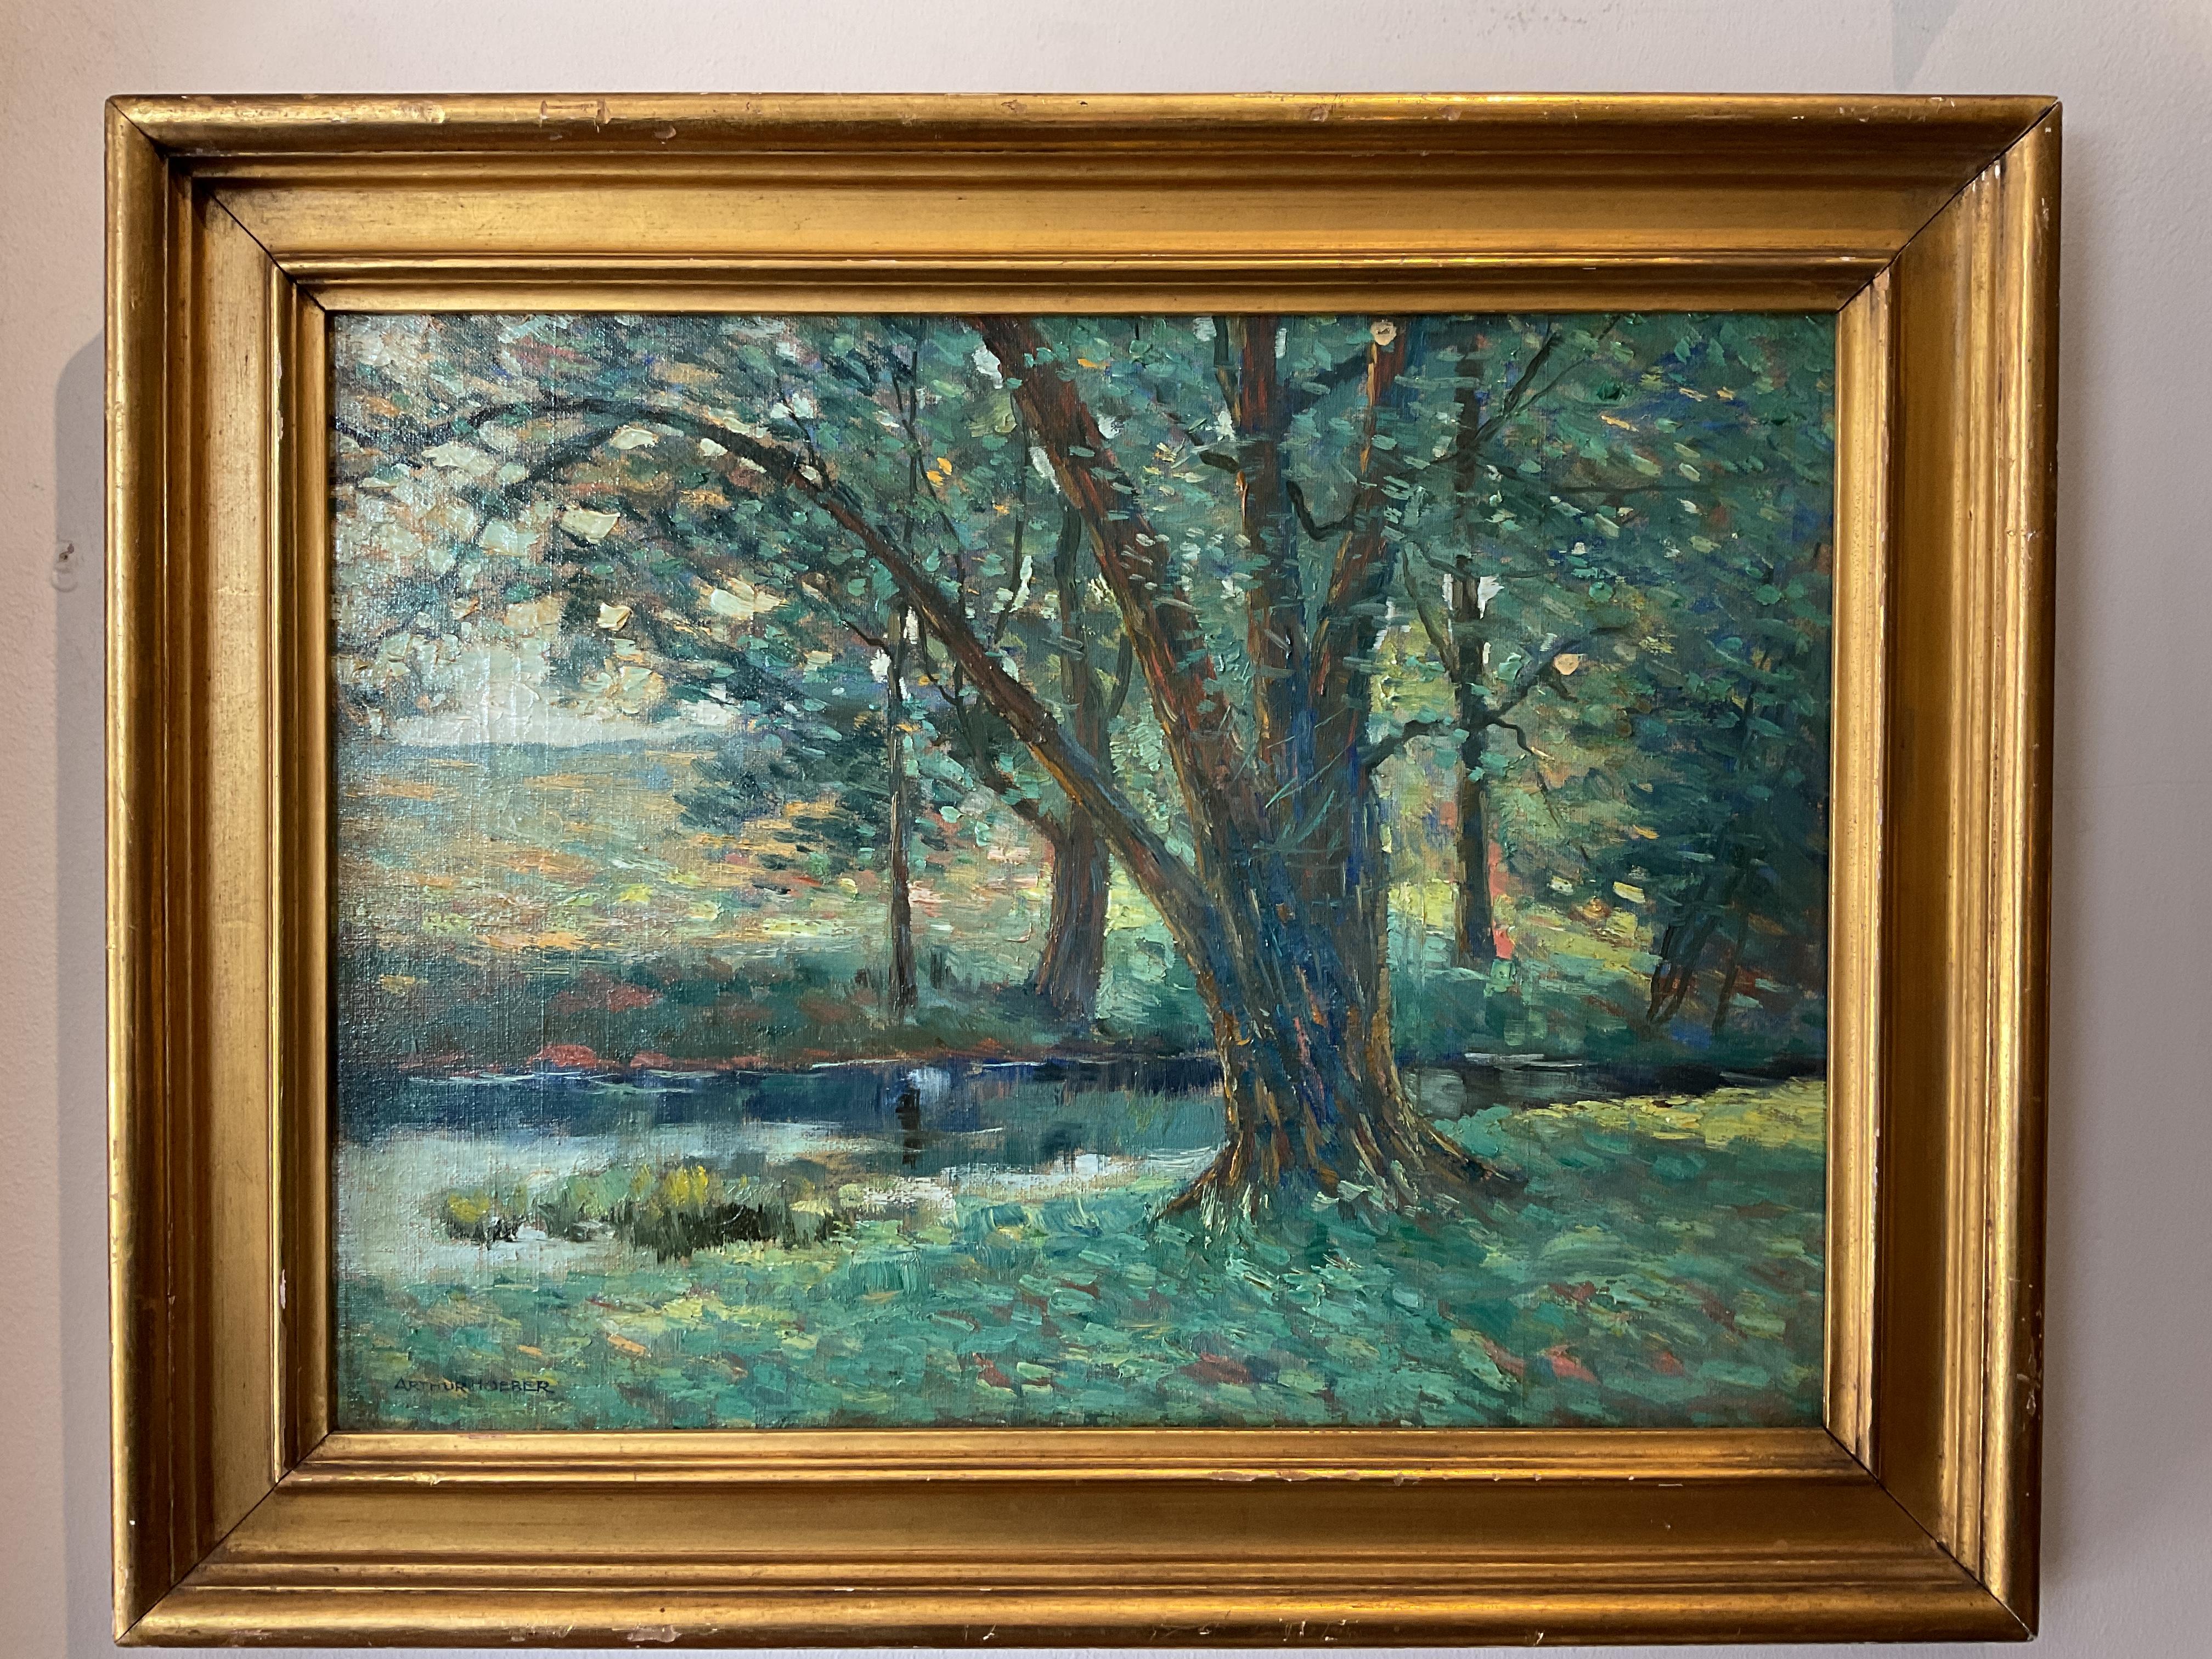 This beautiful American Impressionist oil painting depicts a stately willow tree along the bank of a stream. Artist Arthur Hoeber (1854-1915) used a colorful palette combined with dabs of paint in an impressionist manner that was very popular around